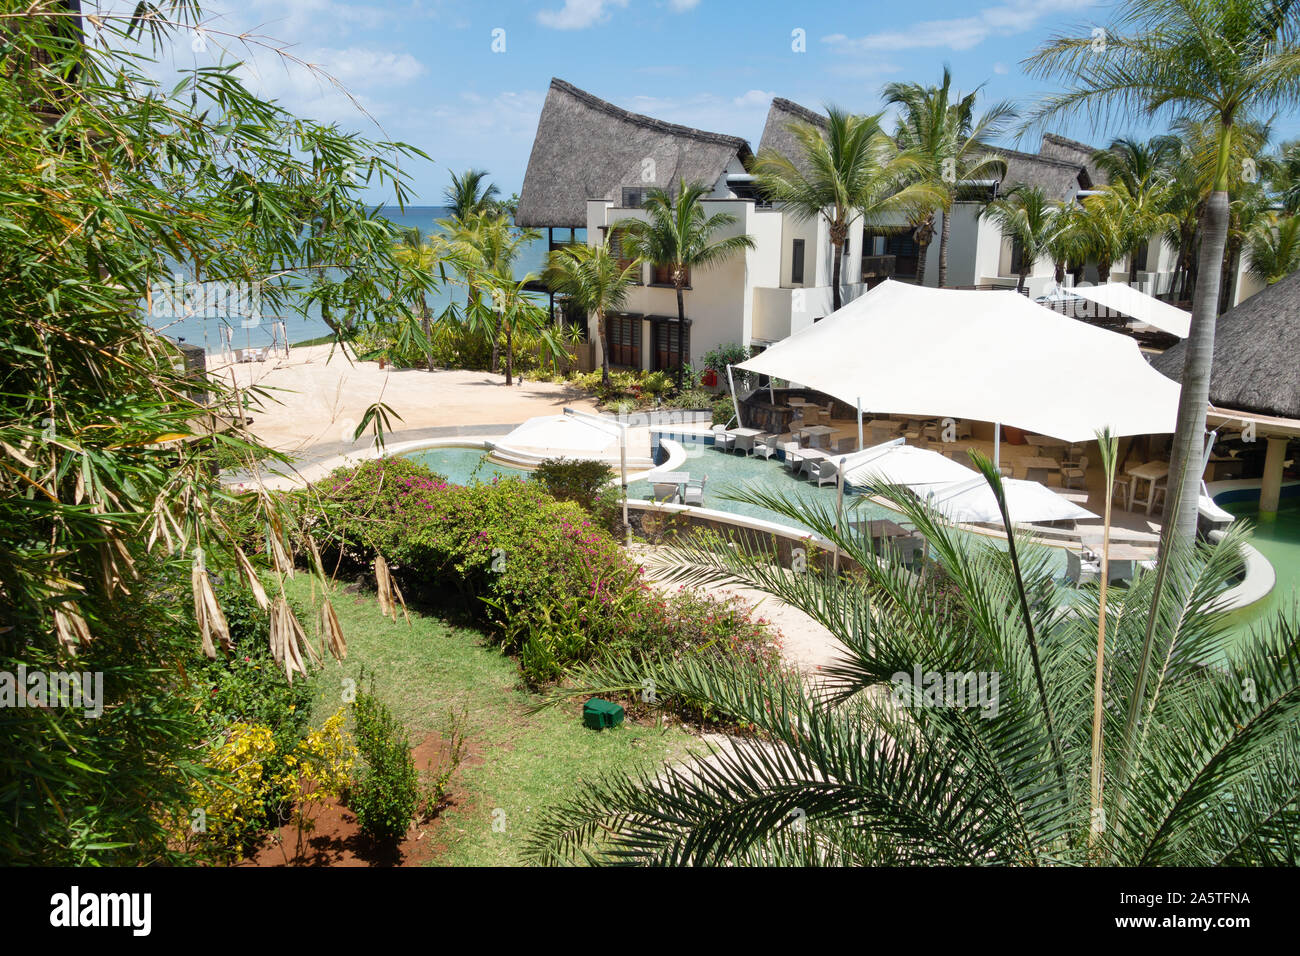 Mauritius Hotels High Resolution Stock Photography and Images - Alamy